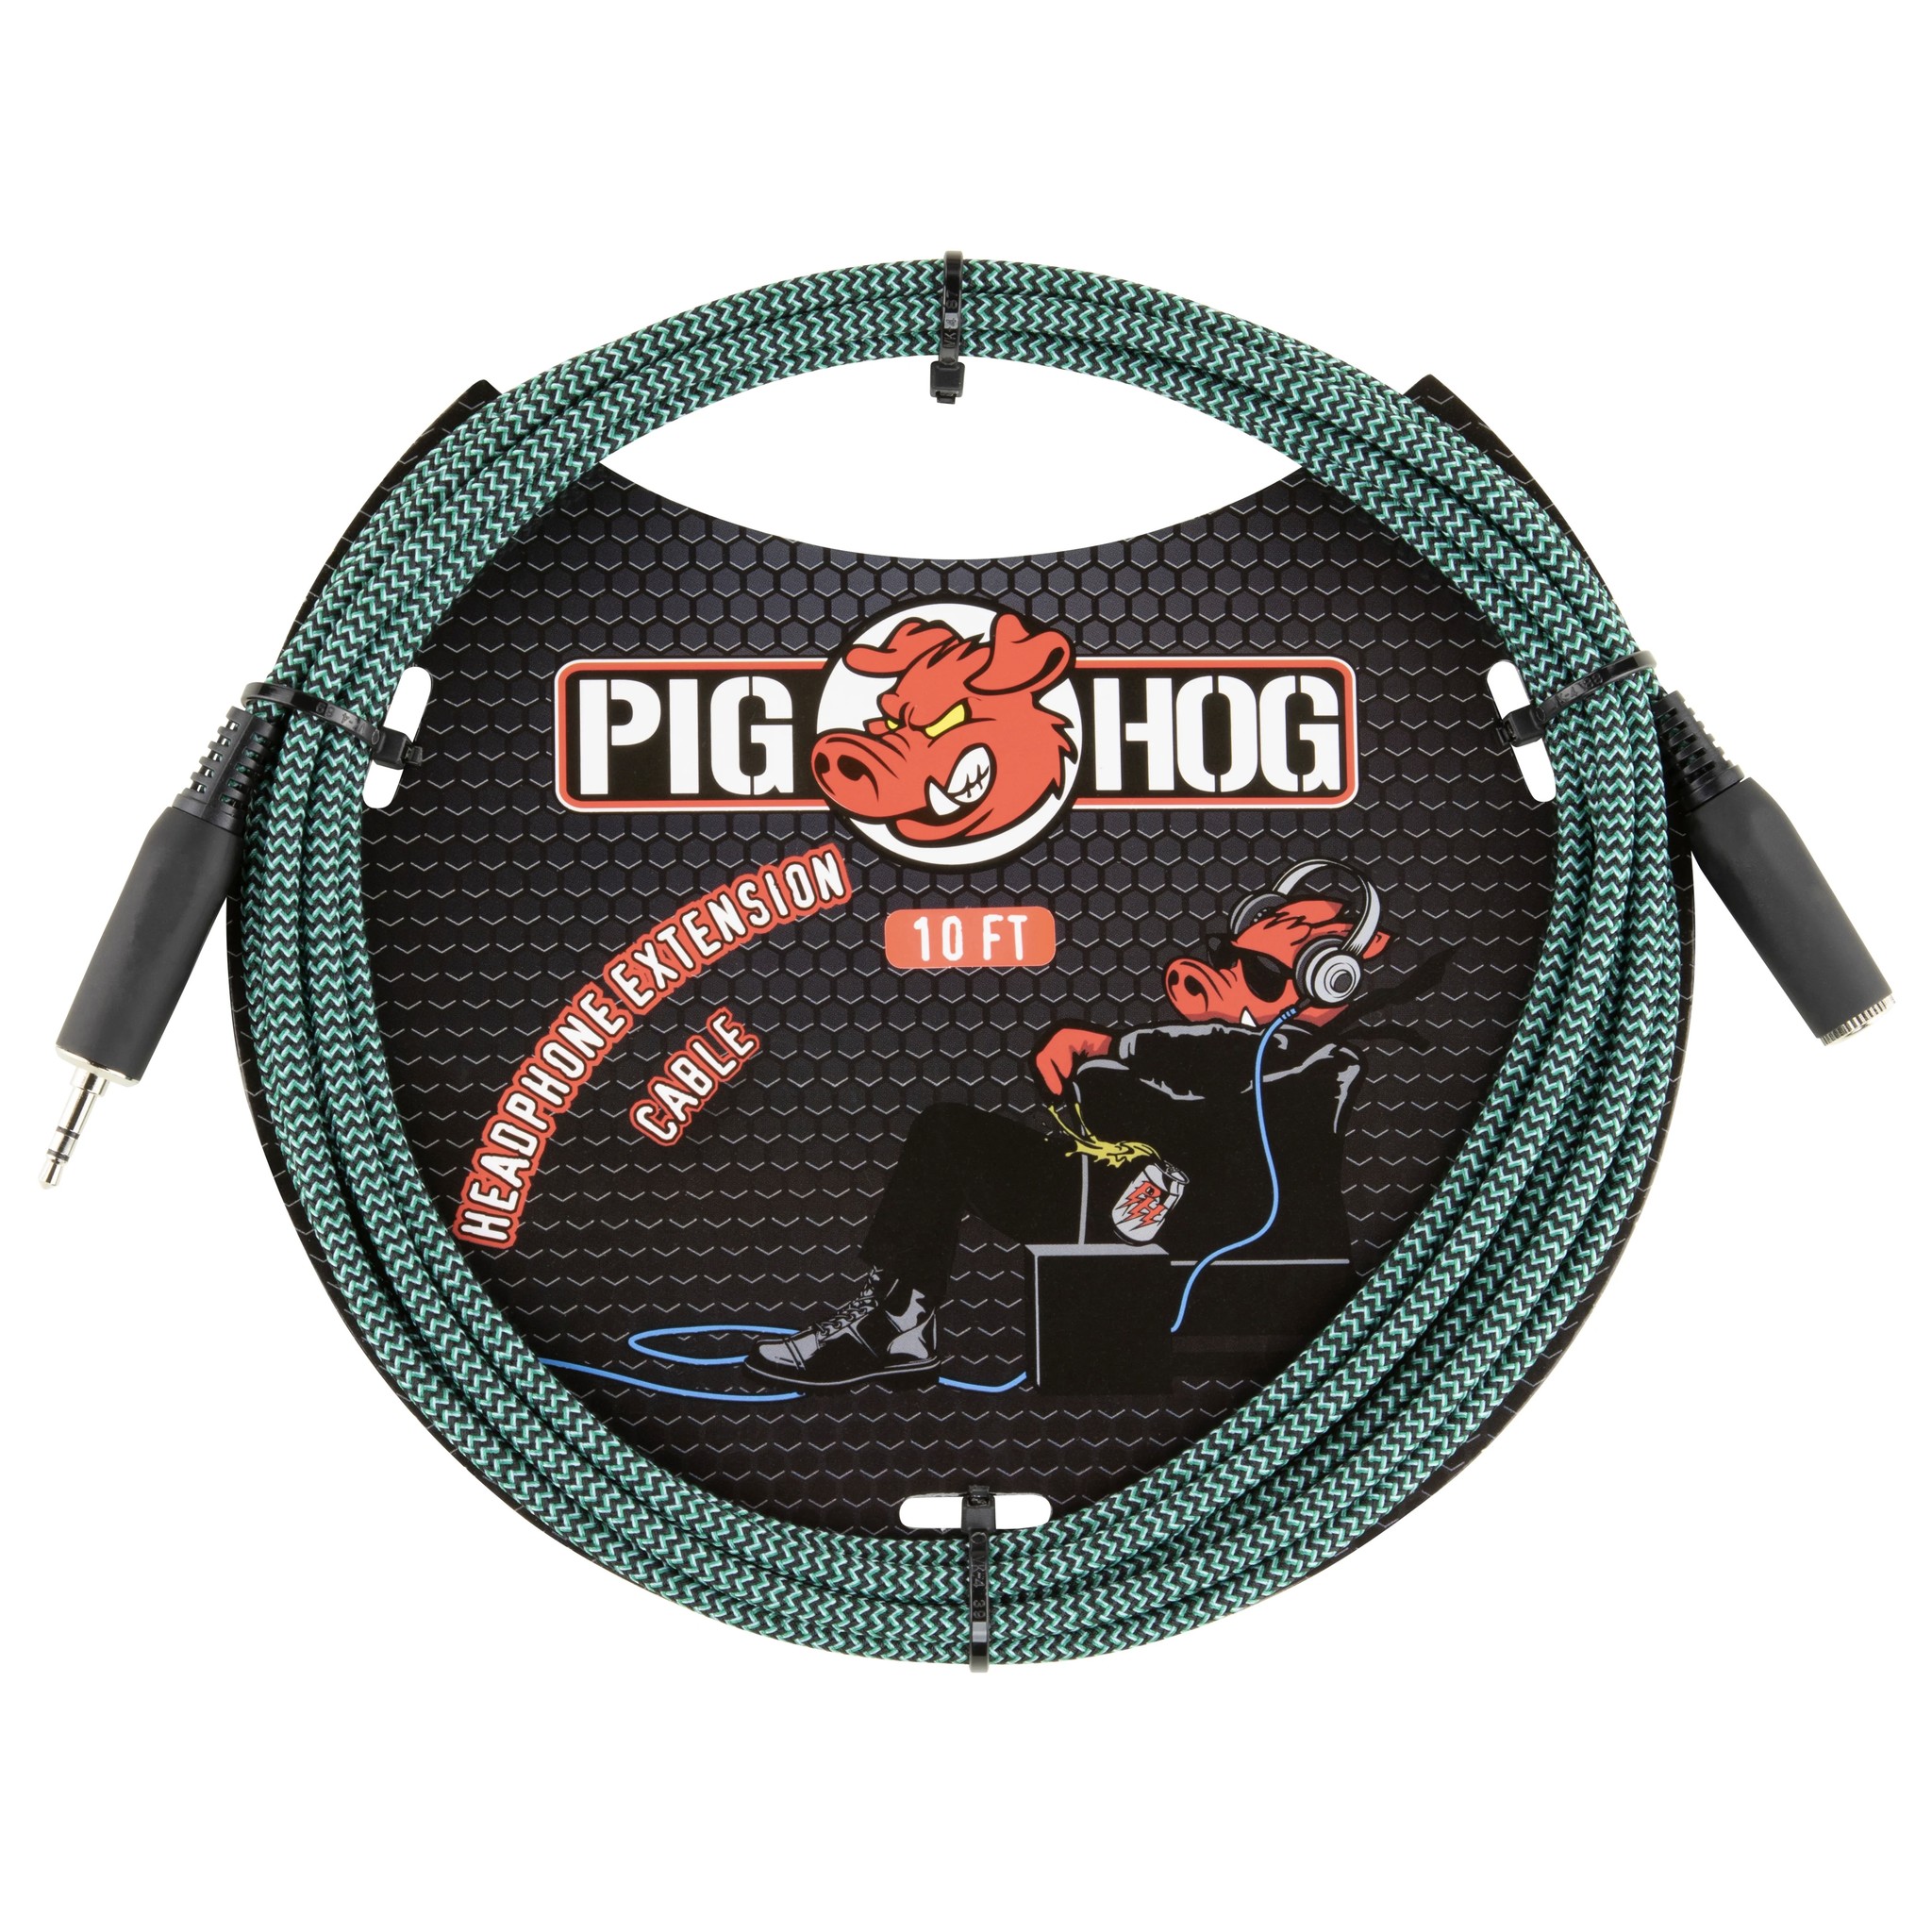 Pig Hog 10ft Headphone Extension Cable, 3.5mm, Tahitian Blue